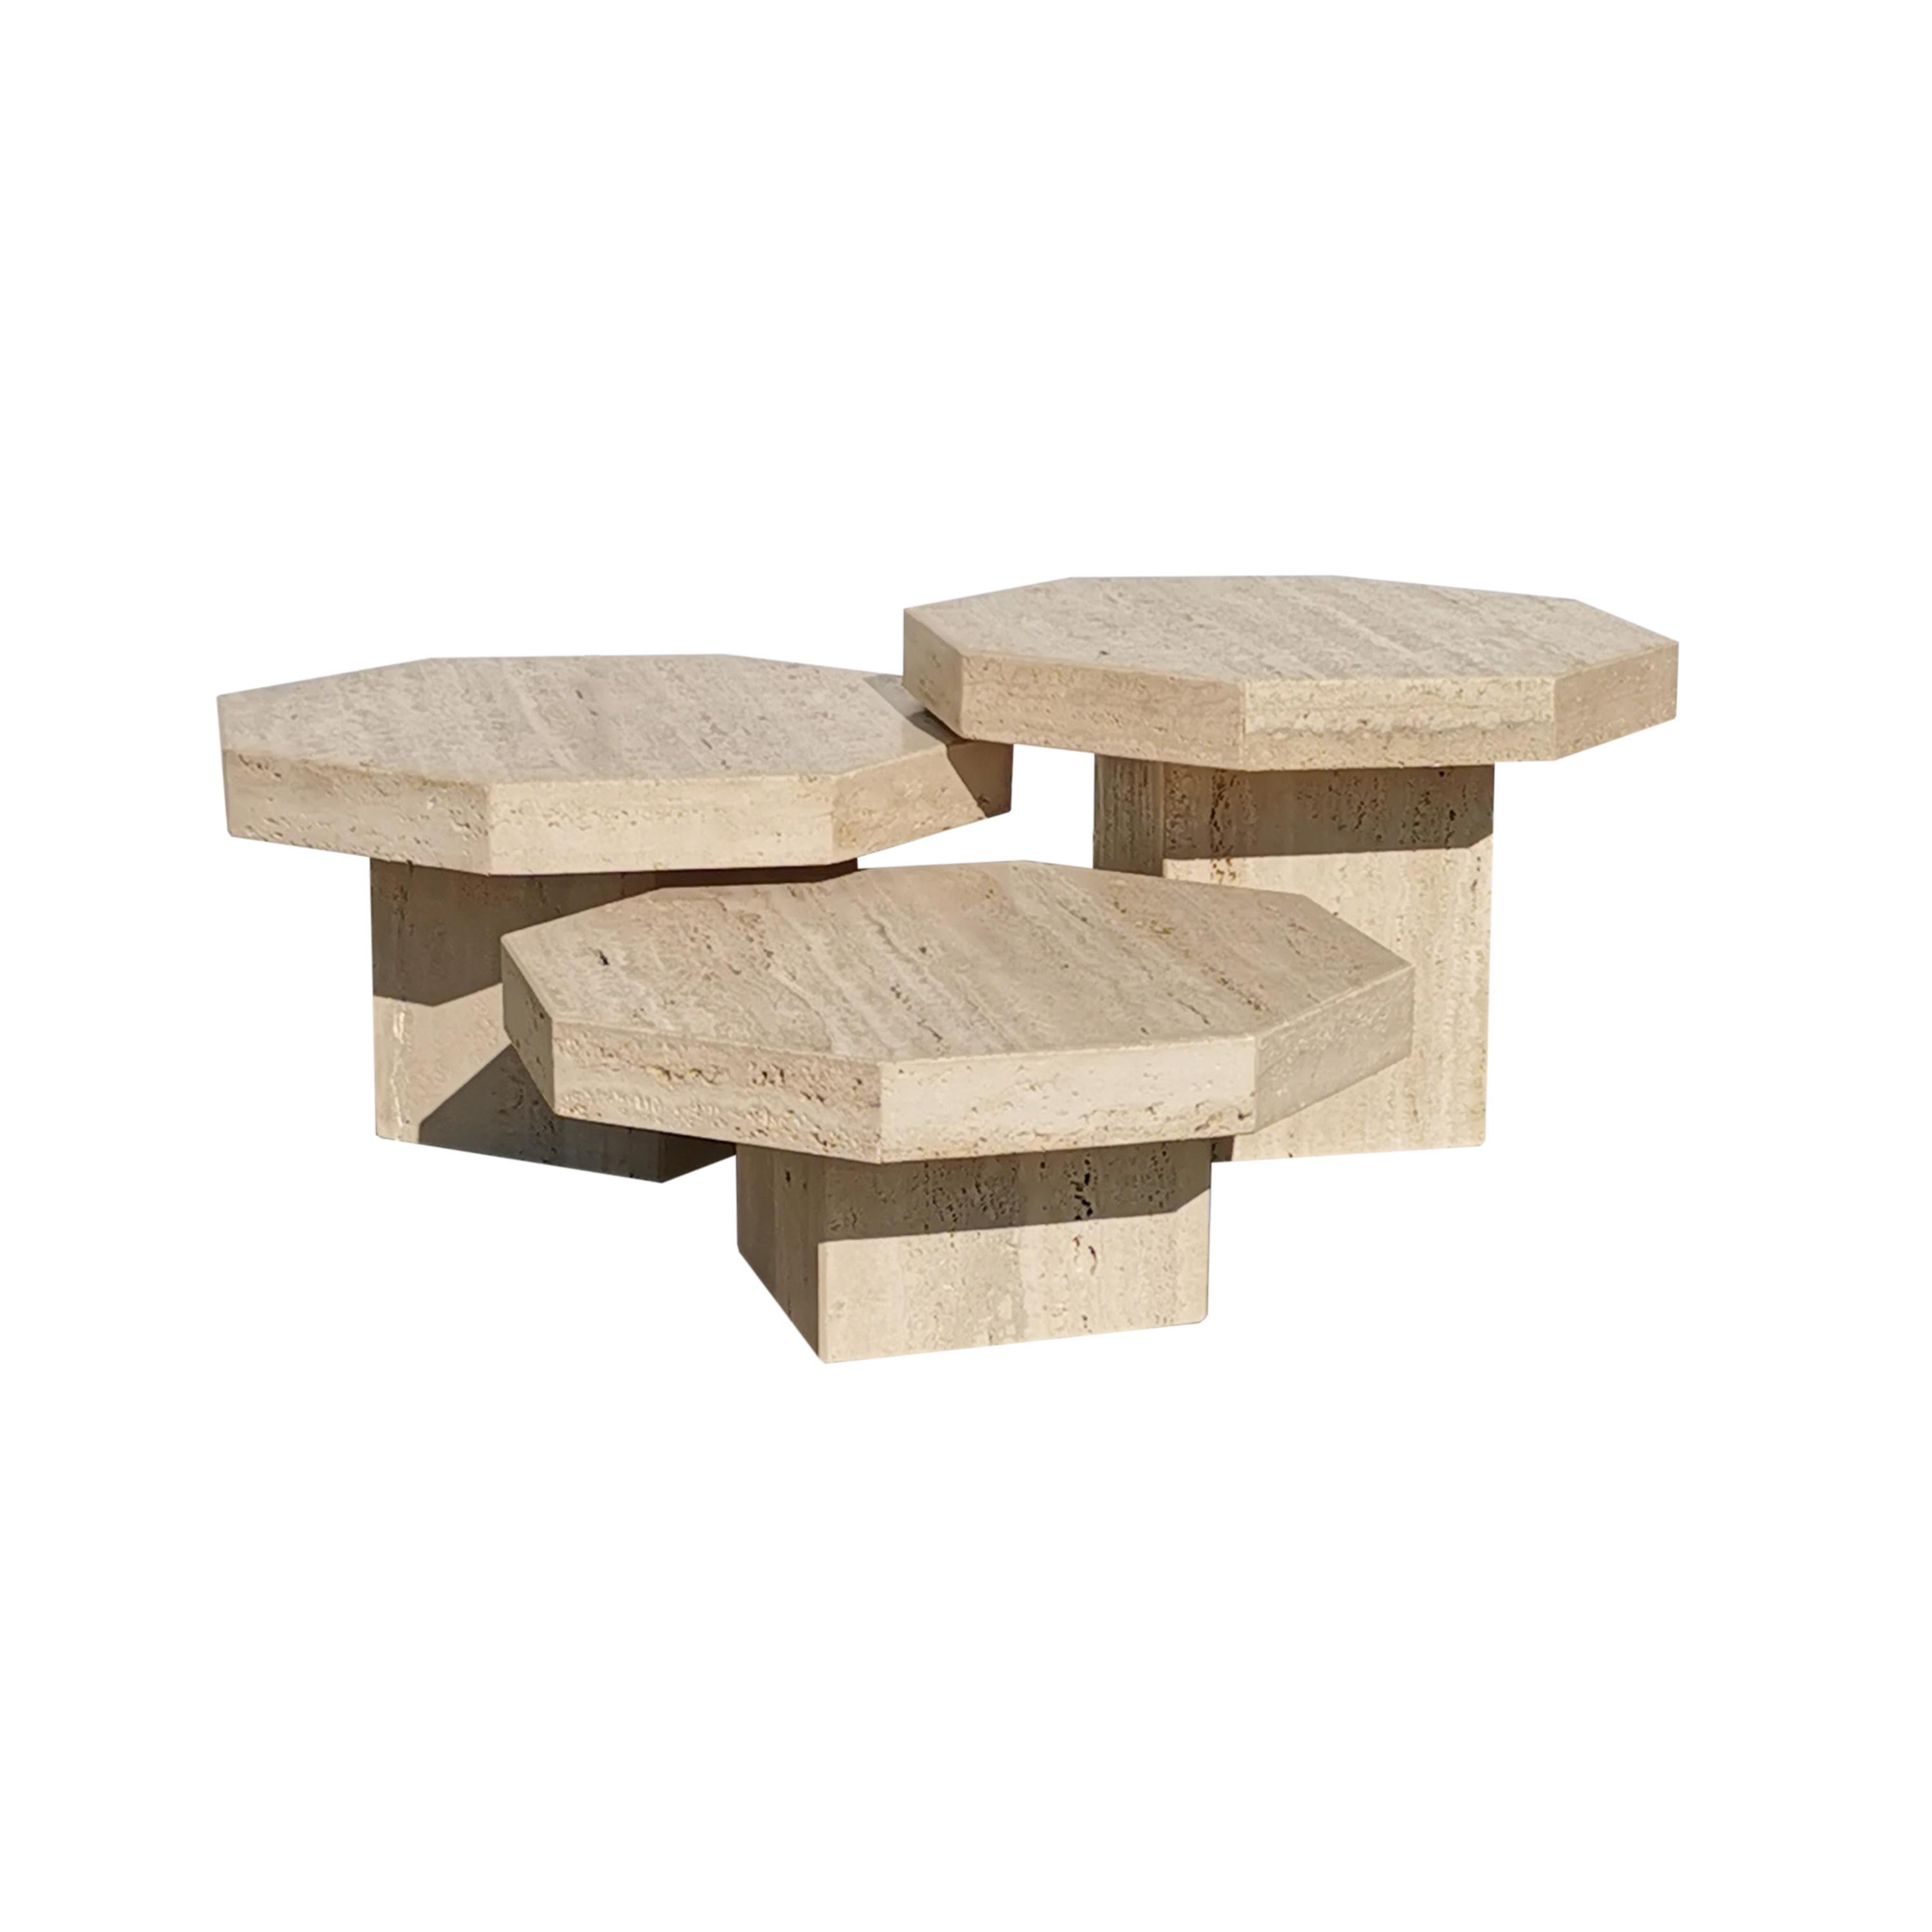 Set of three travertine coffe tables, with different heights.
Thick octagonal tops, richly grained material, raw and natural.
The stone is not bonded, keeping its brutalist appearance.
The tables have three different heights, allowing endless